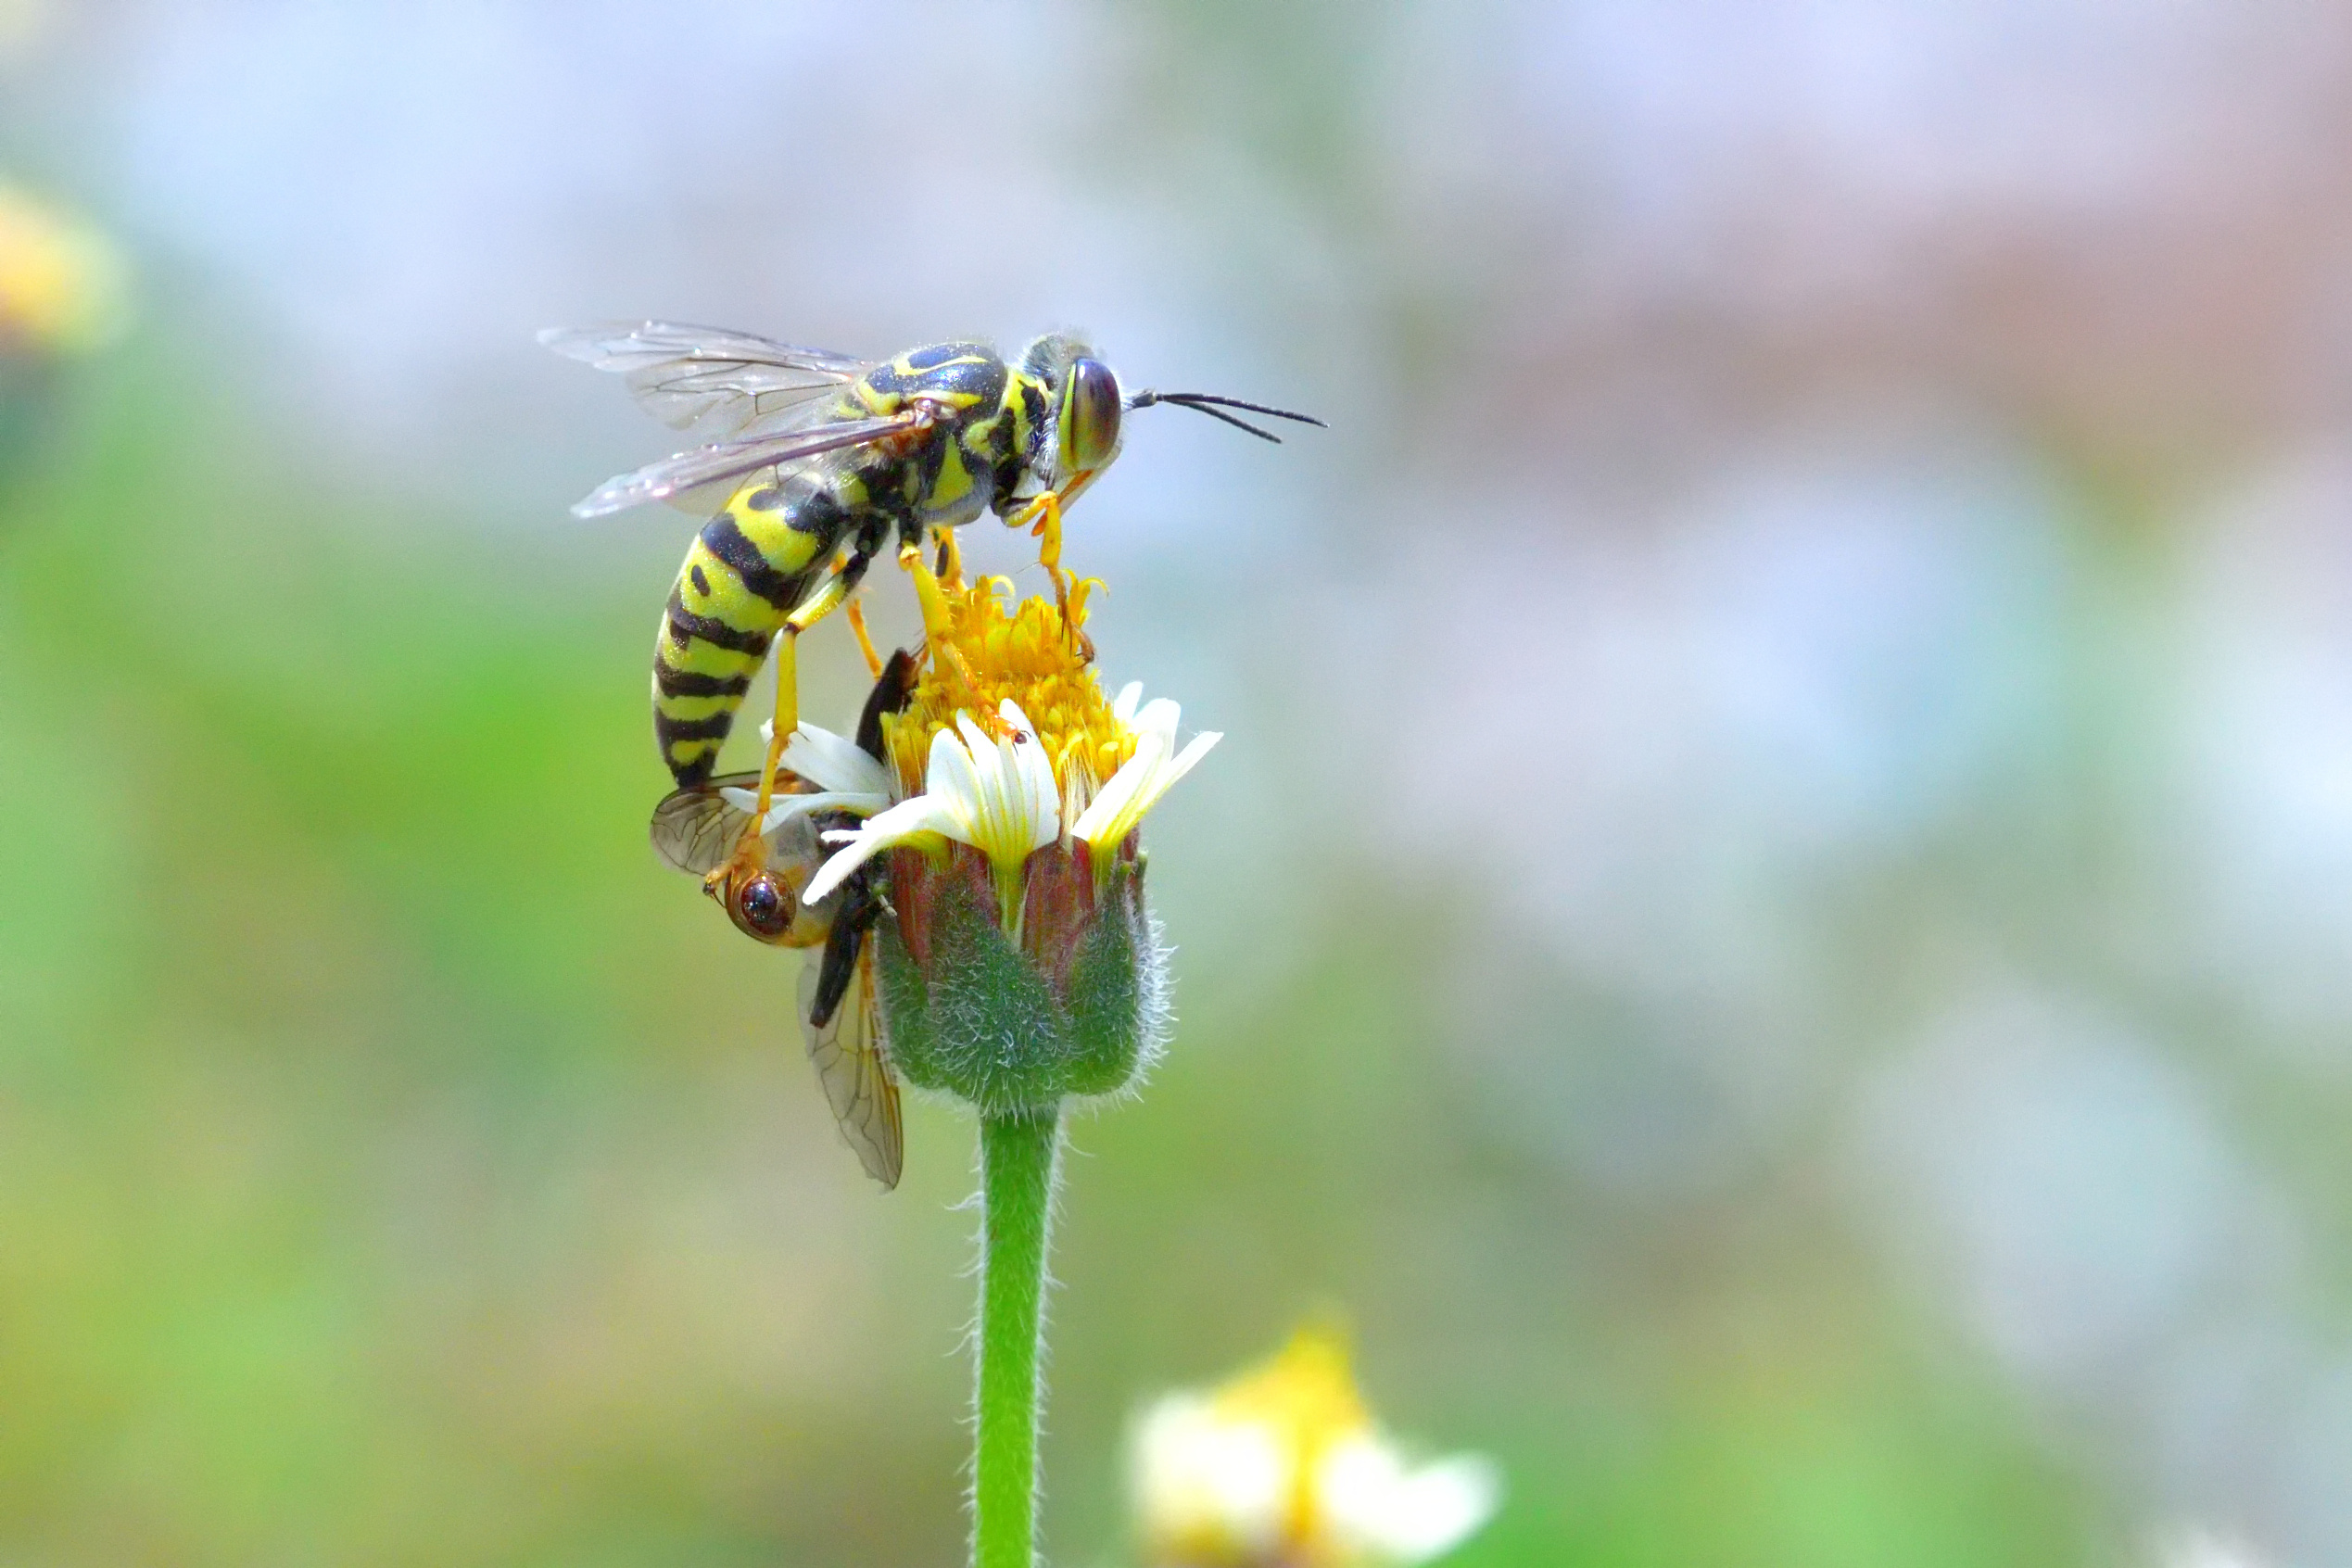 An image of a yellow jacket on a flower - we offer professional yellow jacket removal services in Waco, TX.